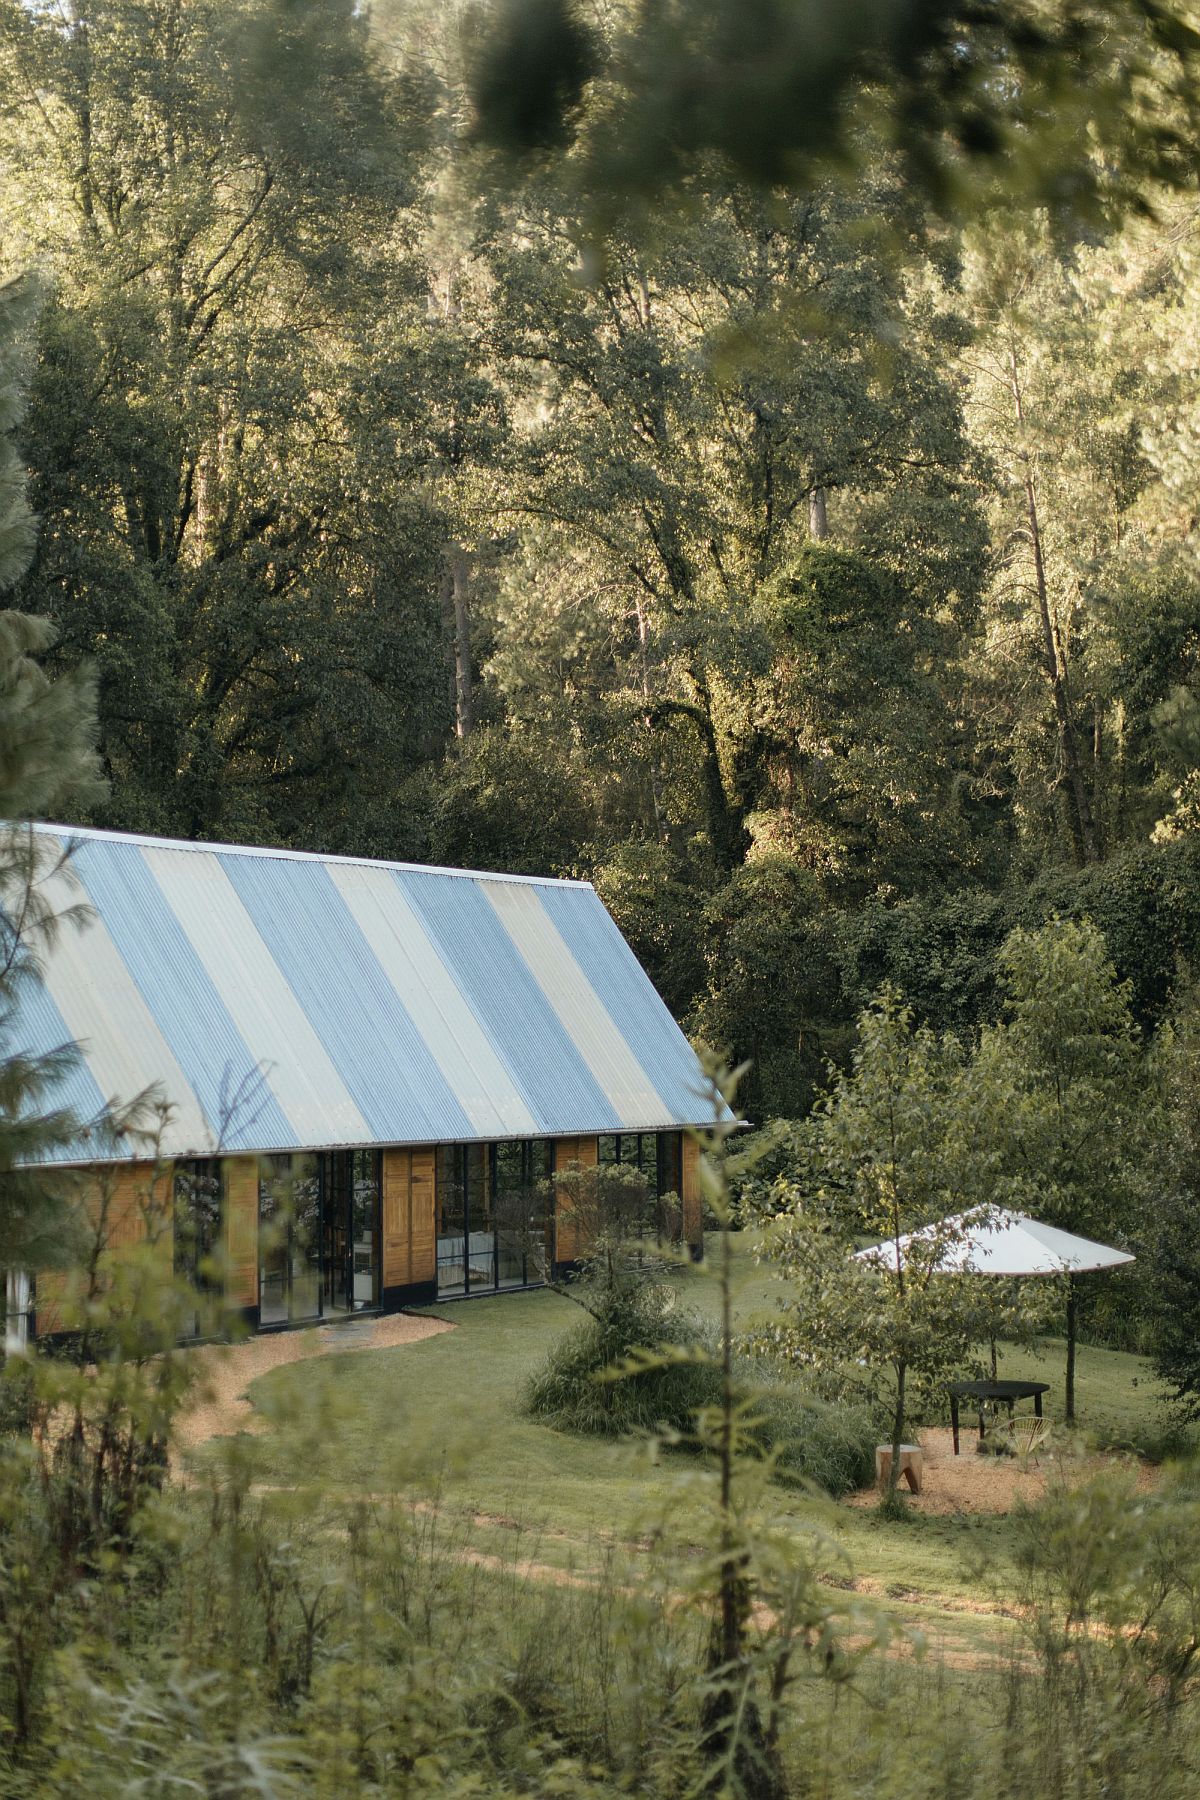 View of the Mi Cielo Lodge in Valle de Bravo surrounded by forest landscape